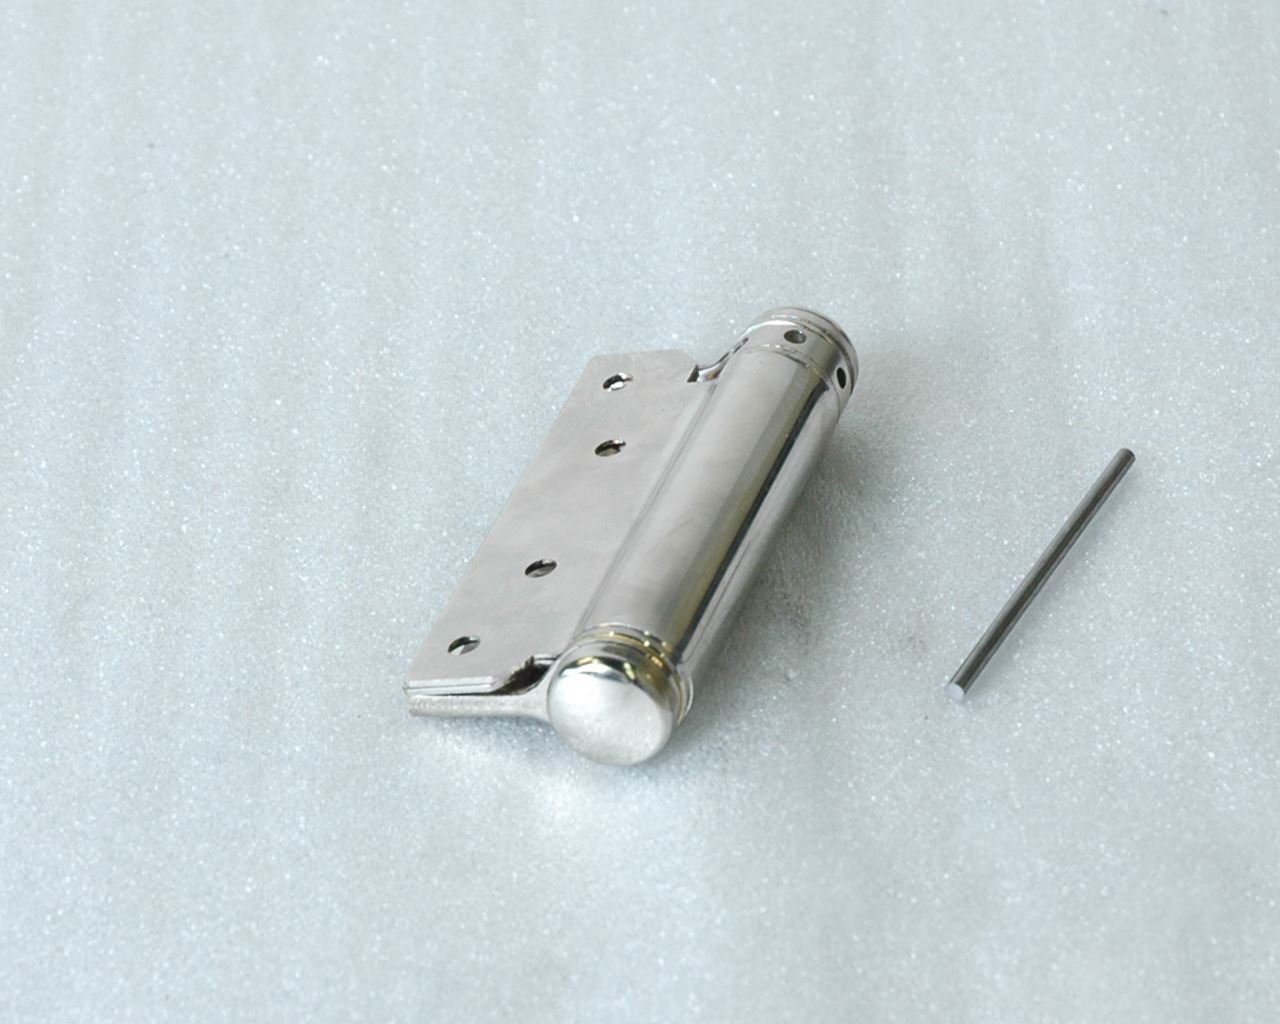 Lift table spare part - Spring hinges ASSA 279-100